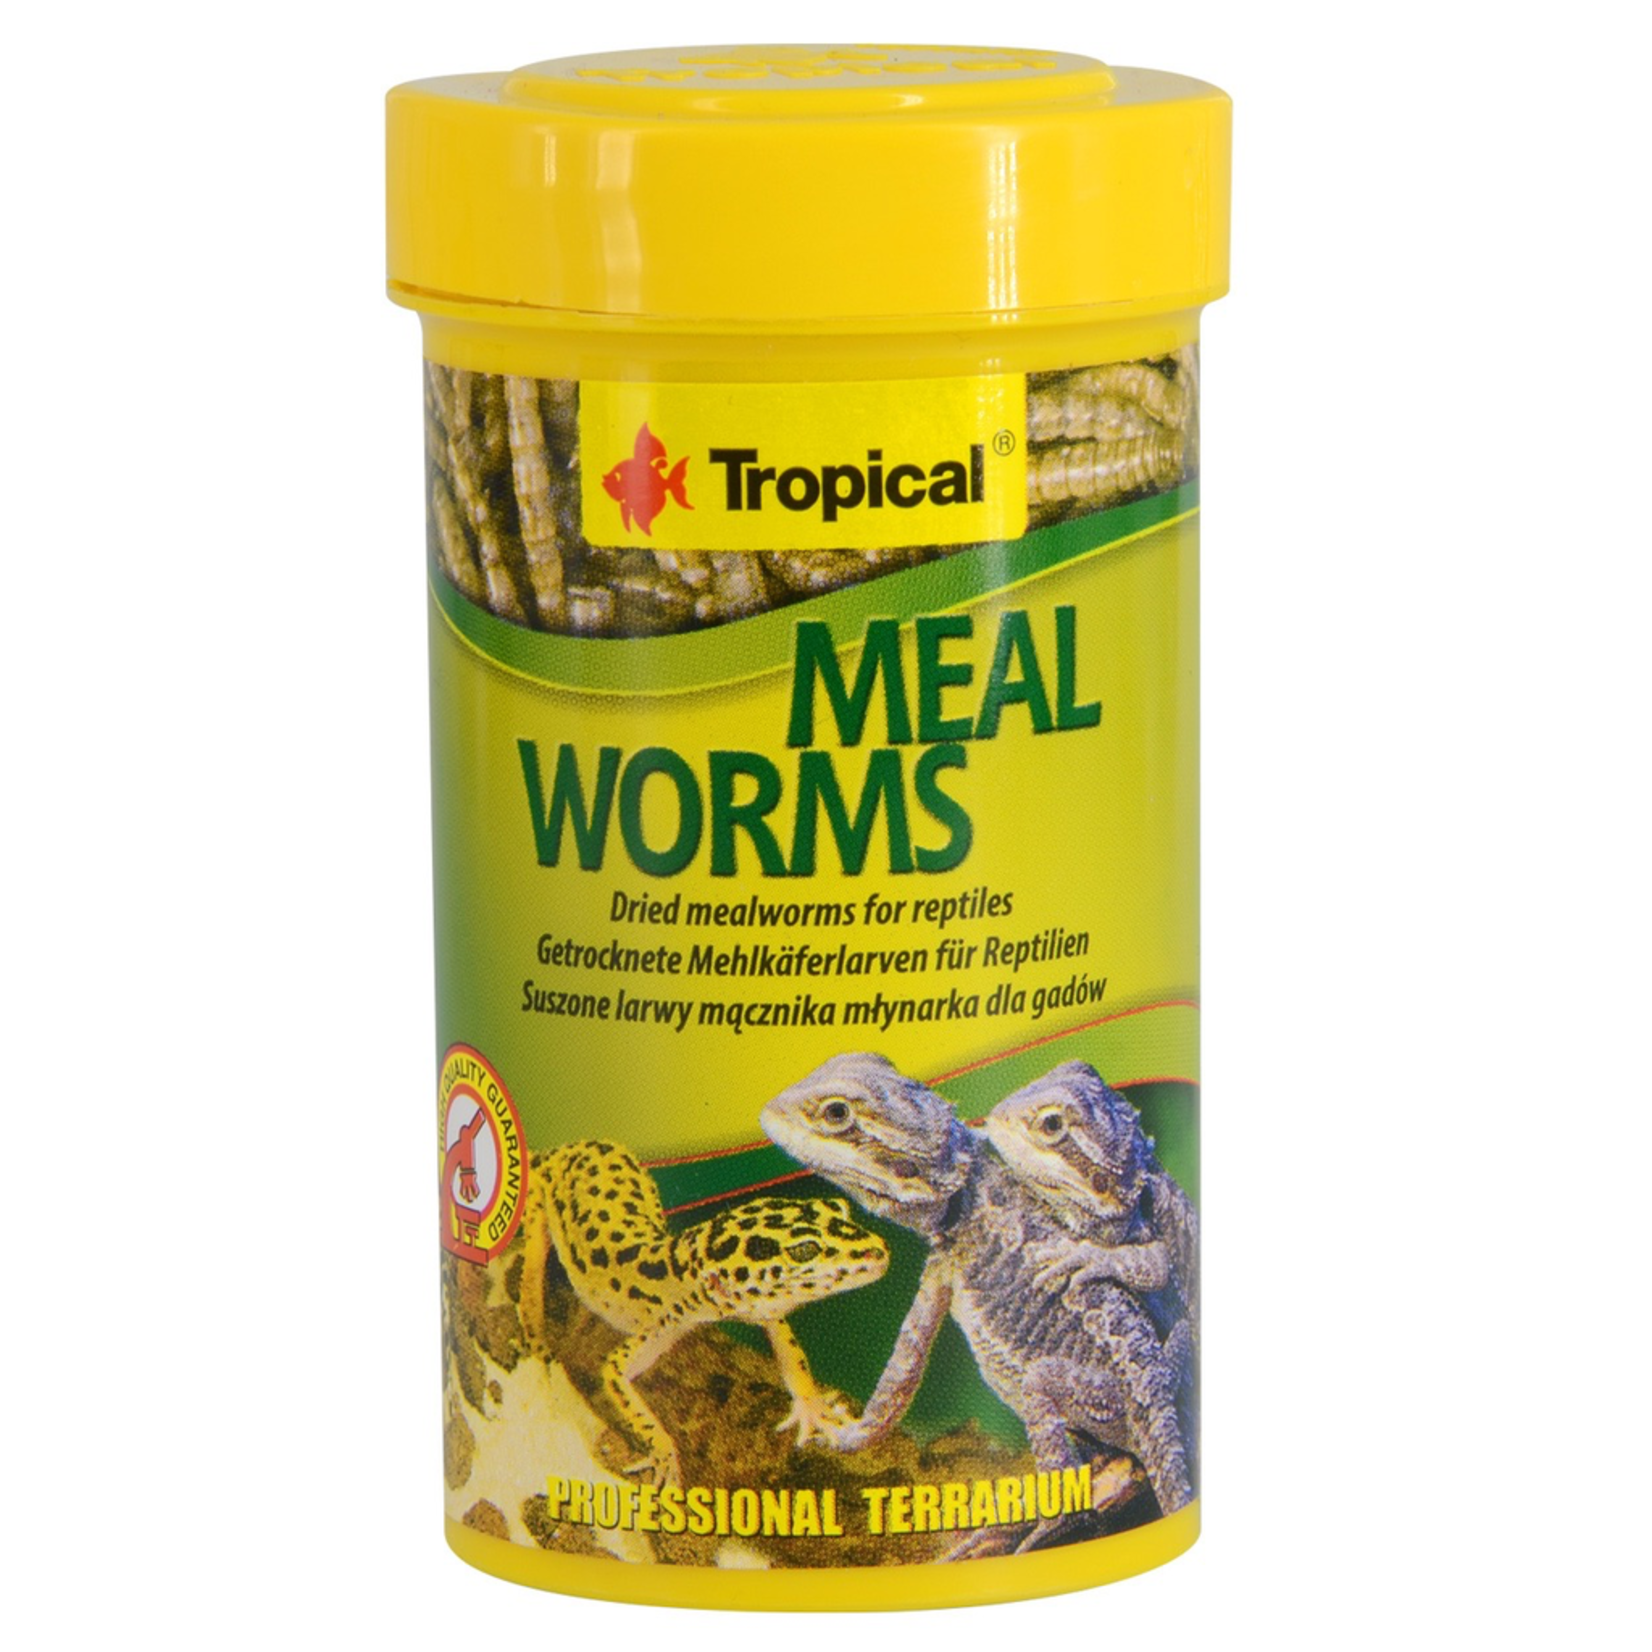 TROPICAL (W) Tropical Dried Meal Worms - 13 g